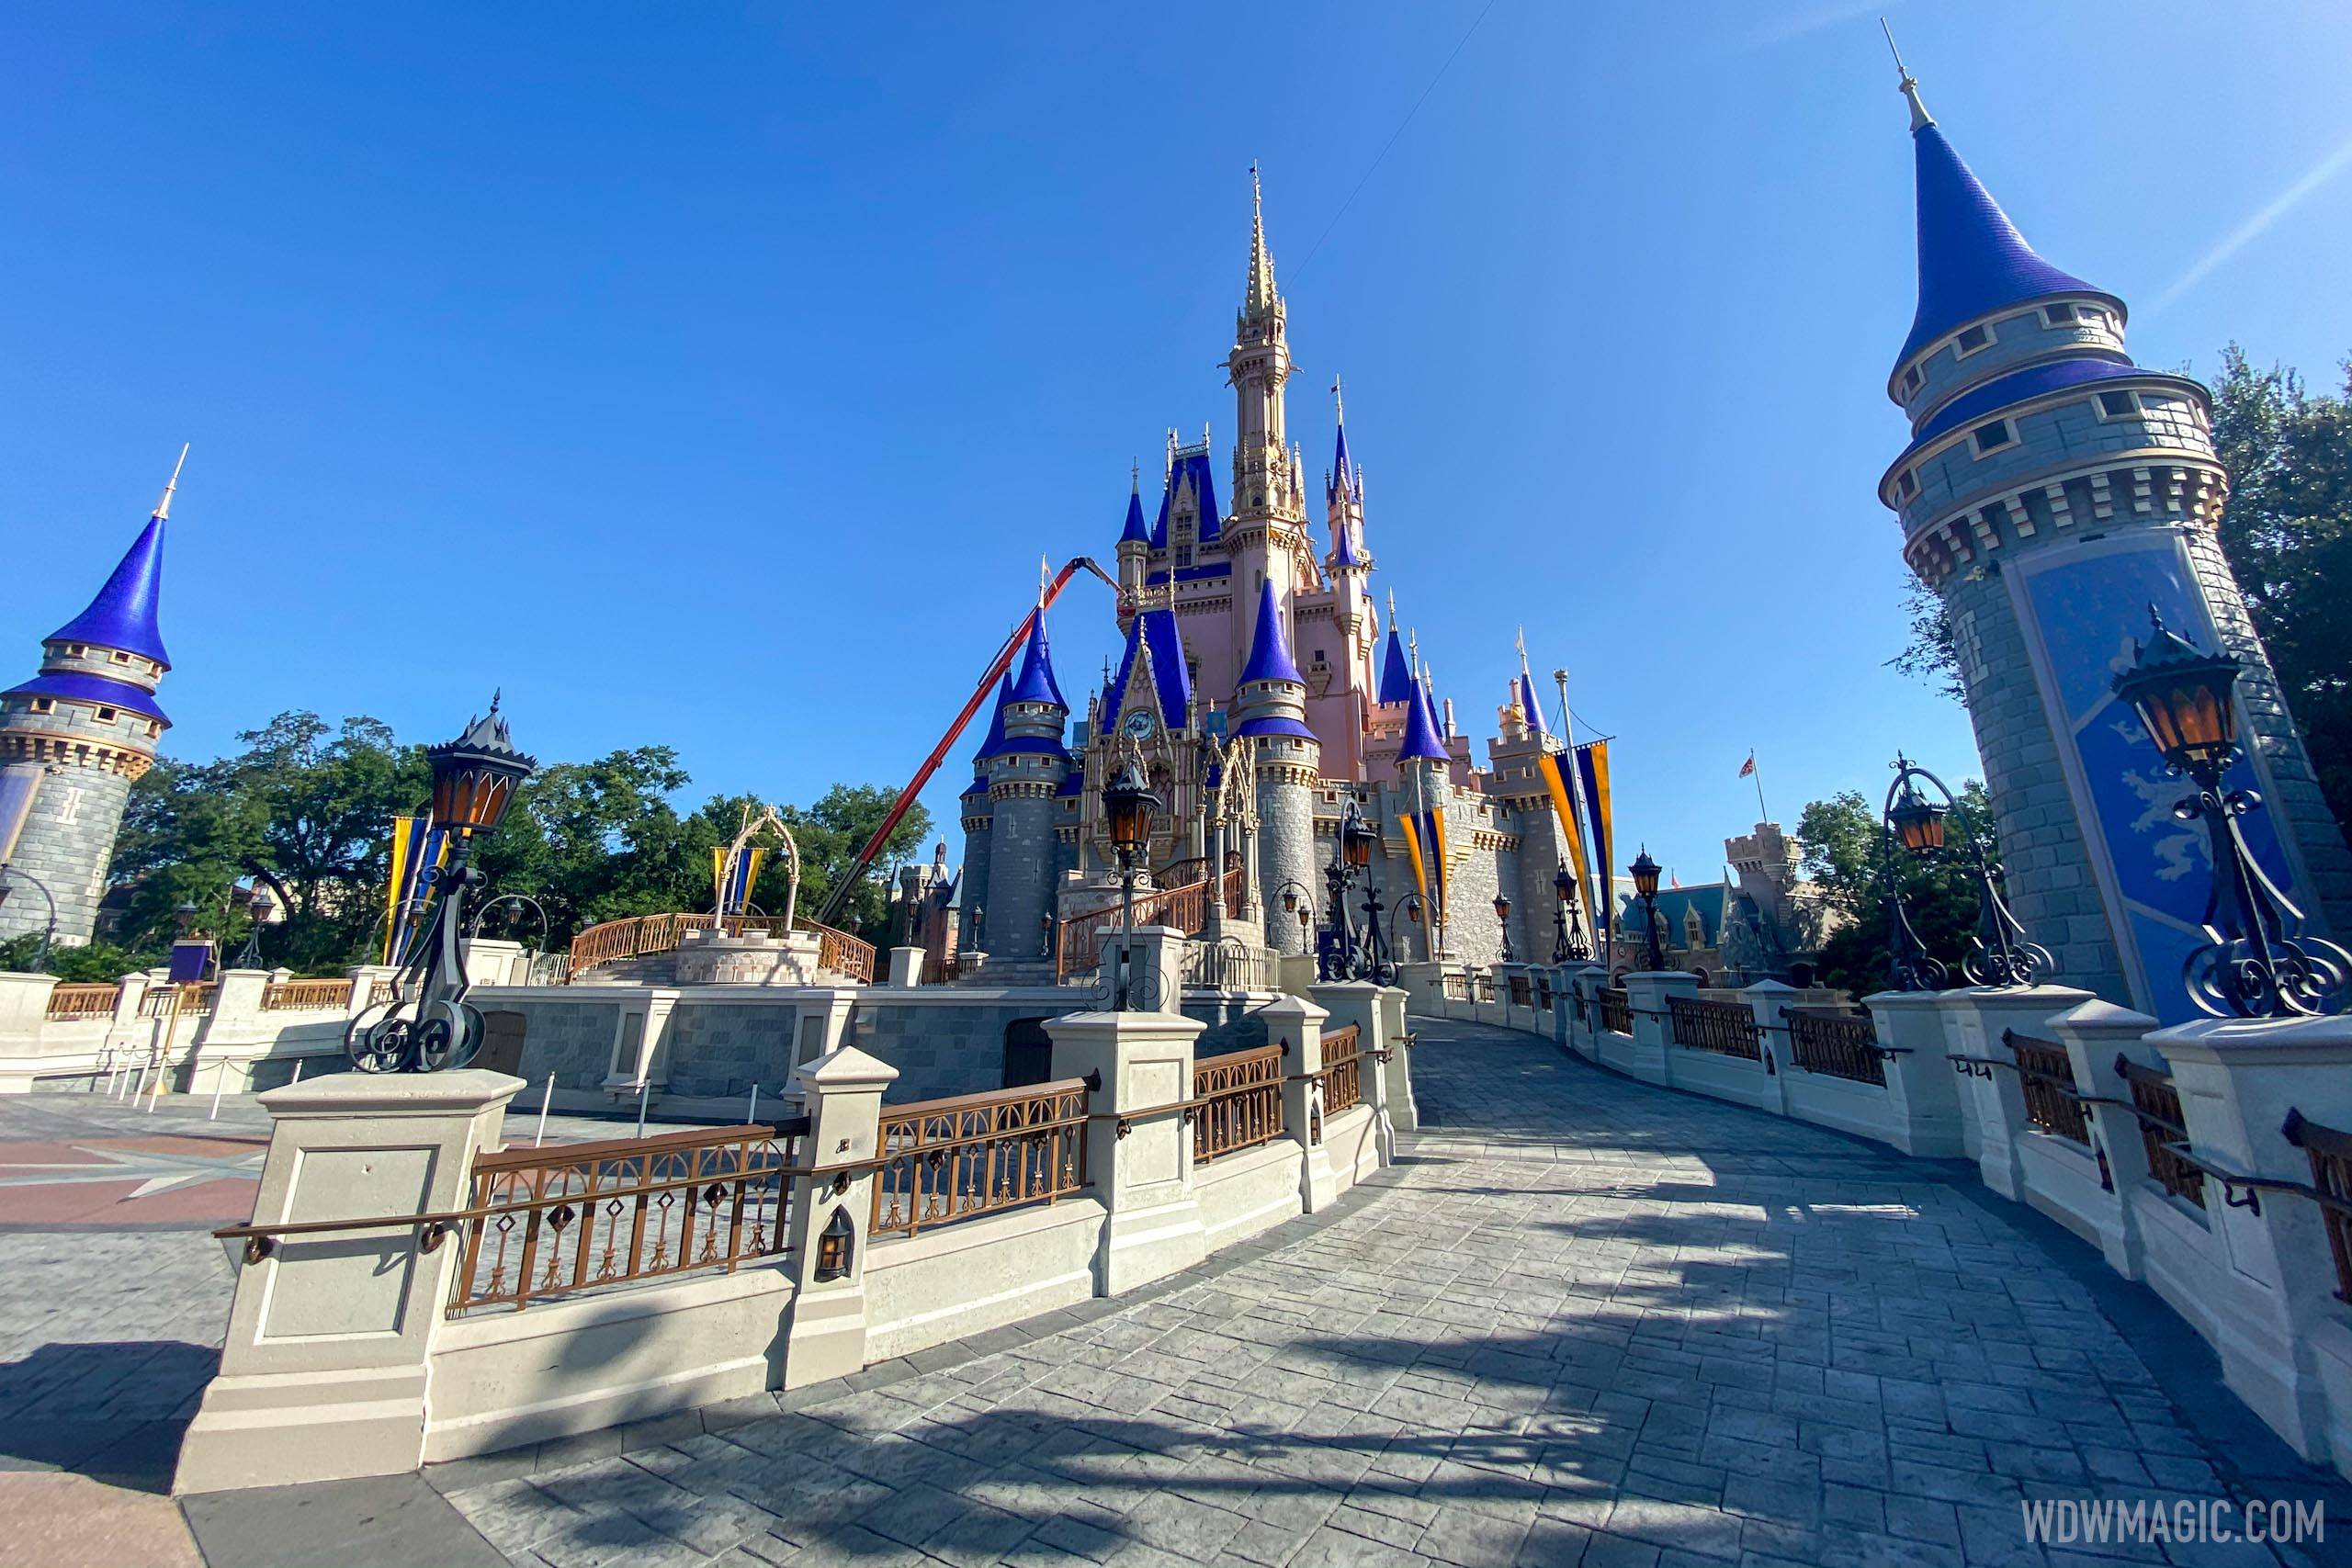 PHOTOS - First look at the nearly complete Cinderella Castle color scheme from inside the Magic Kingdom